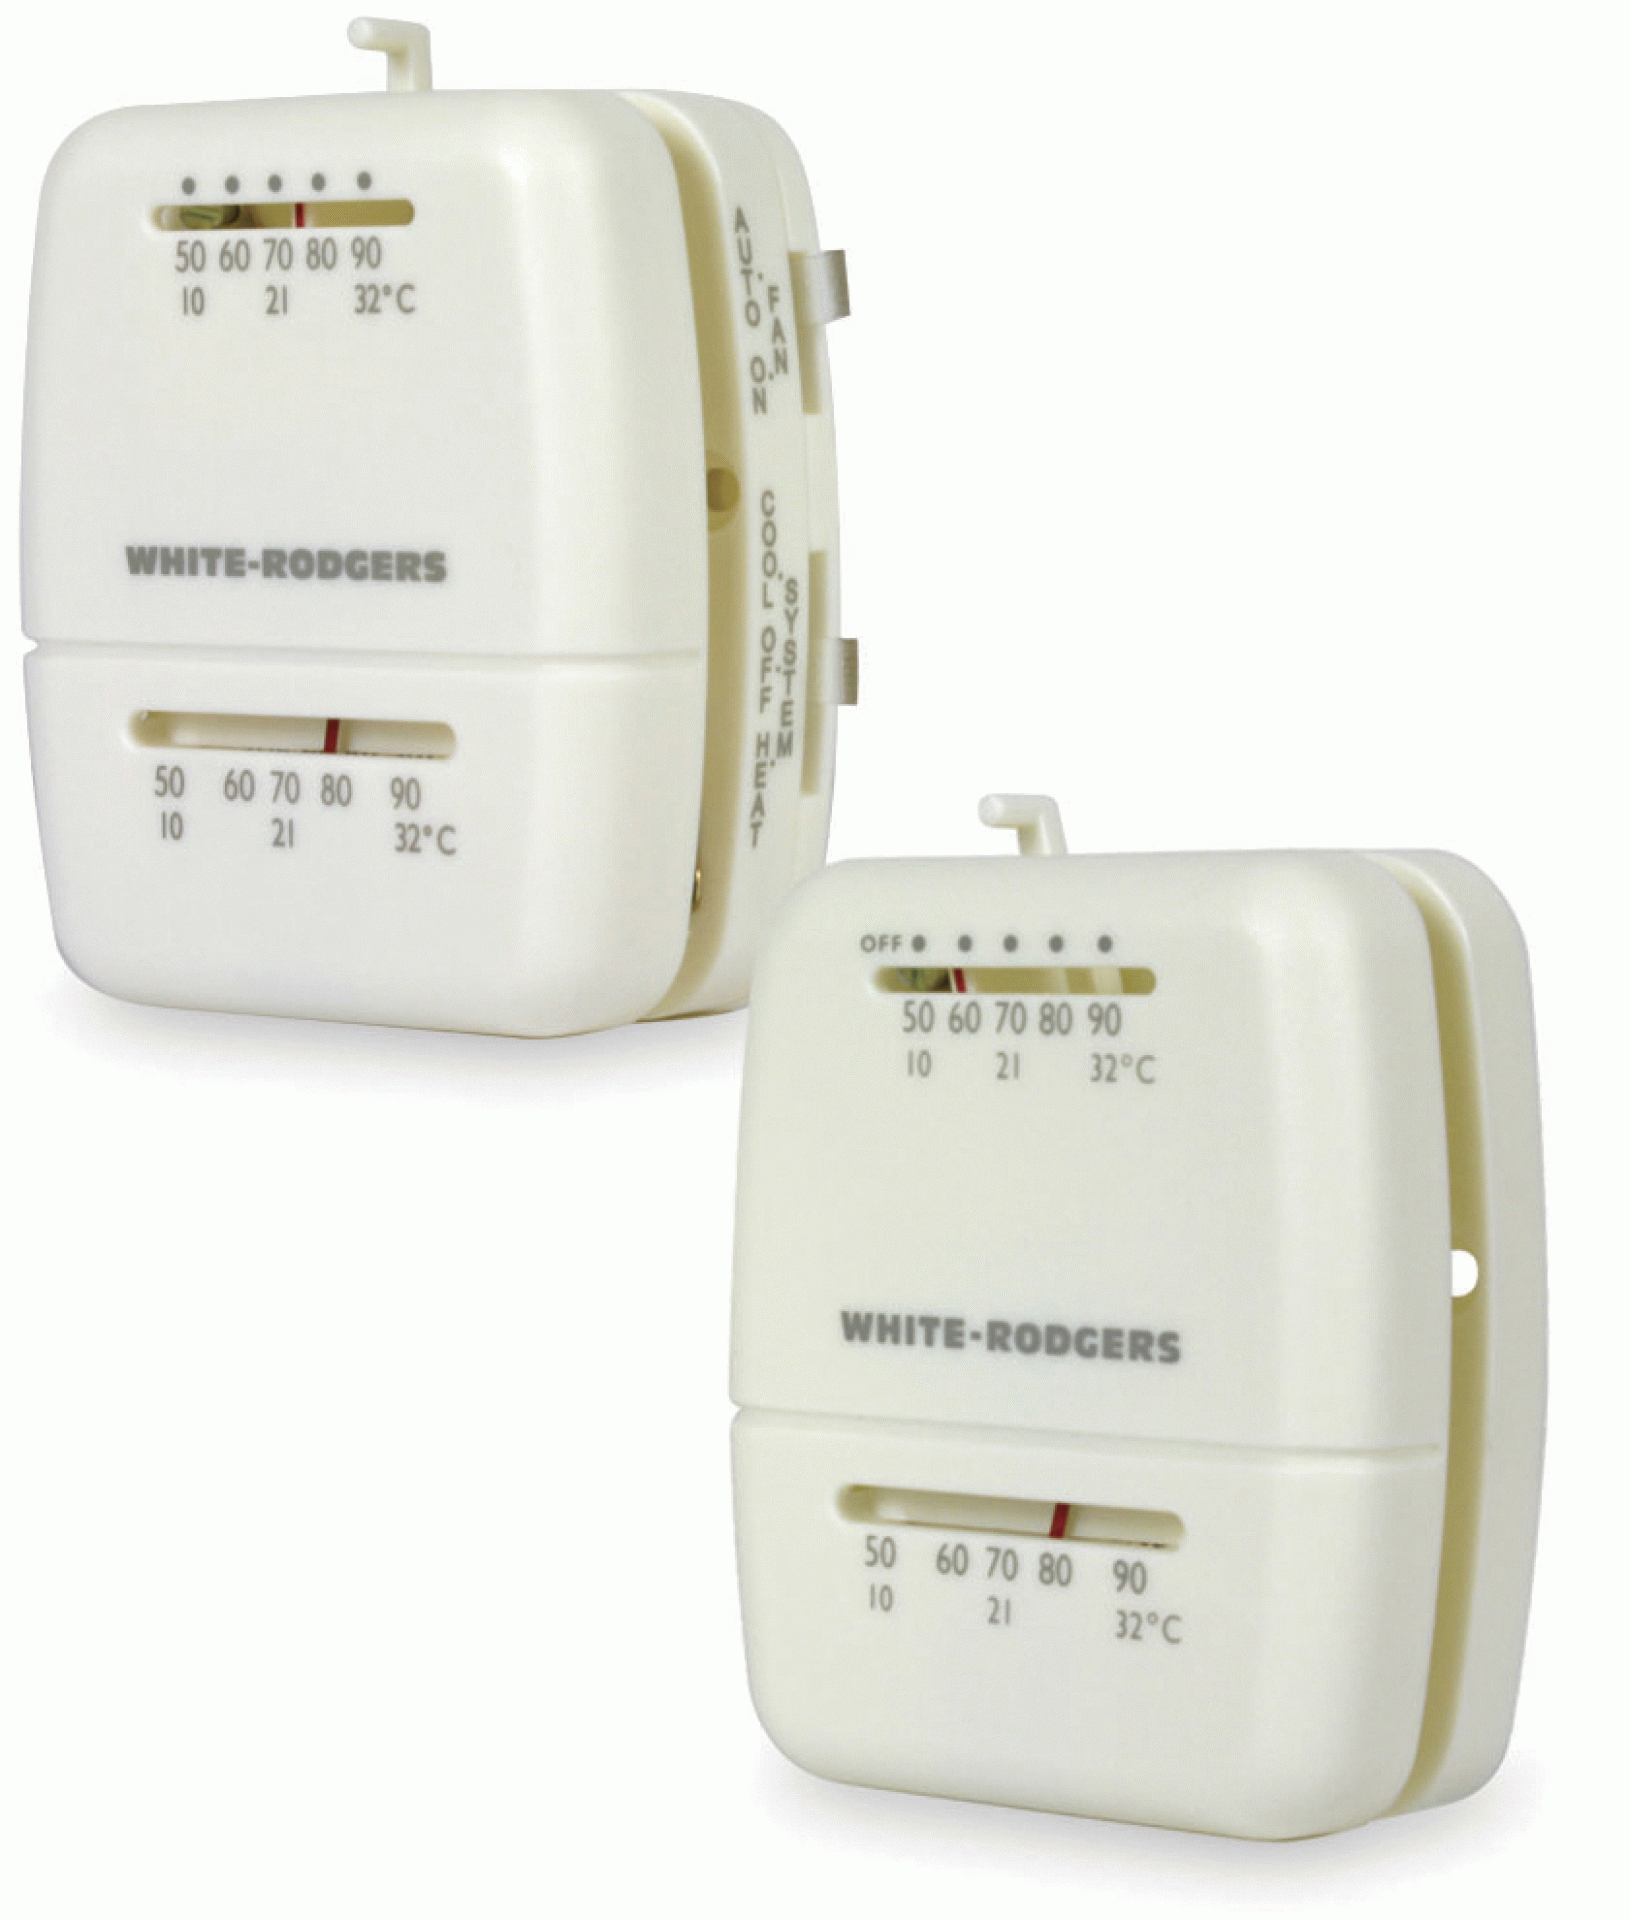 CAMCO MFG INC | 09221 | Wall THERMOSTAT - HEAT/COOL - Beige